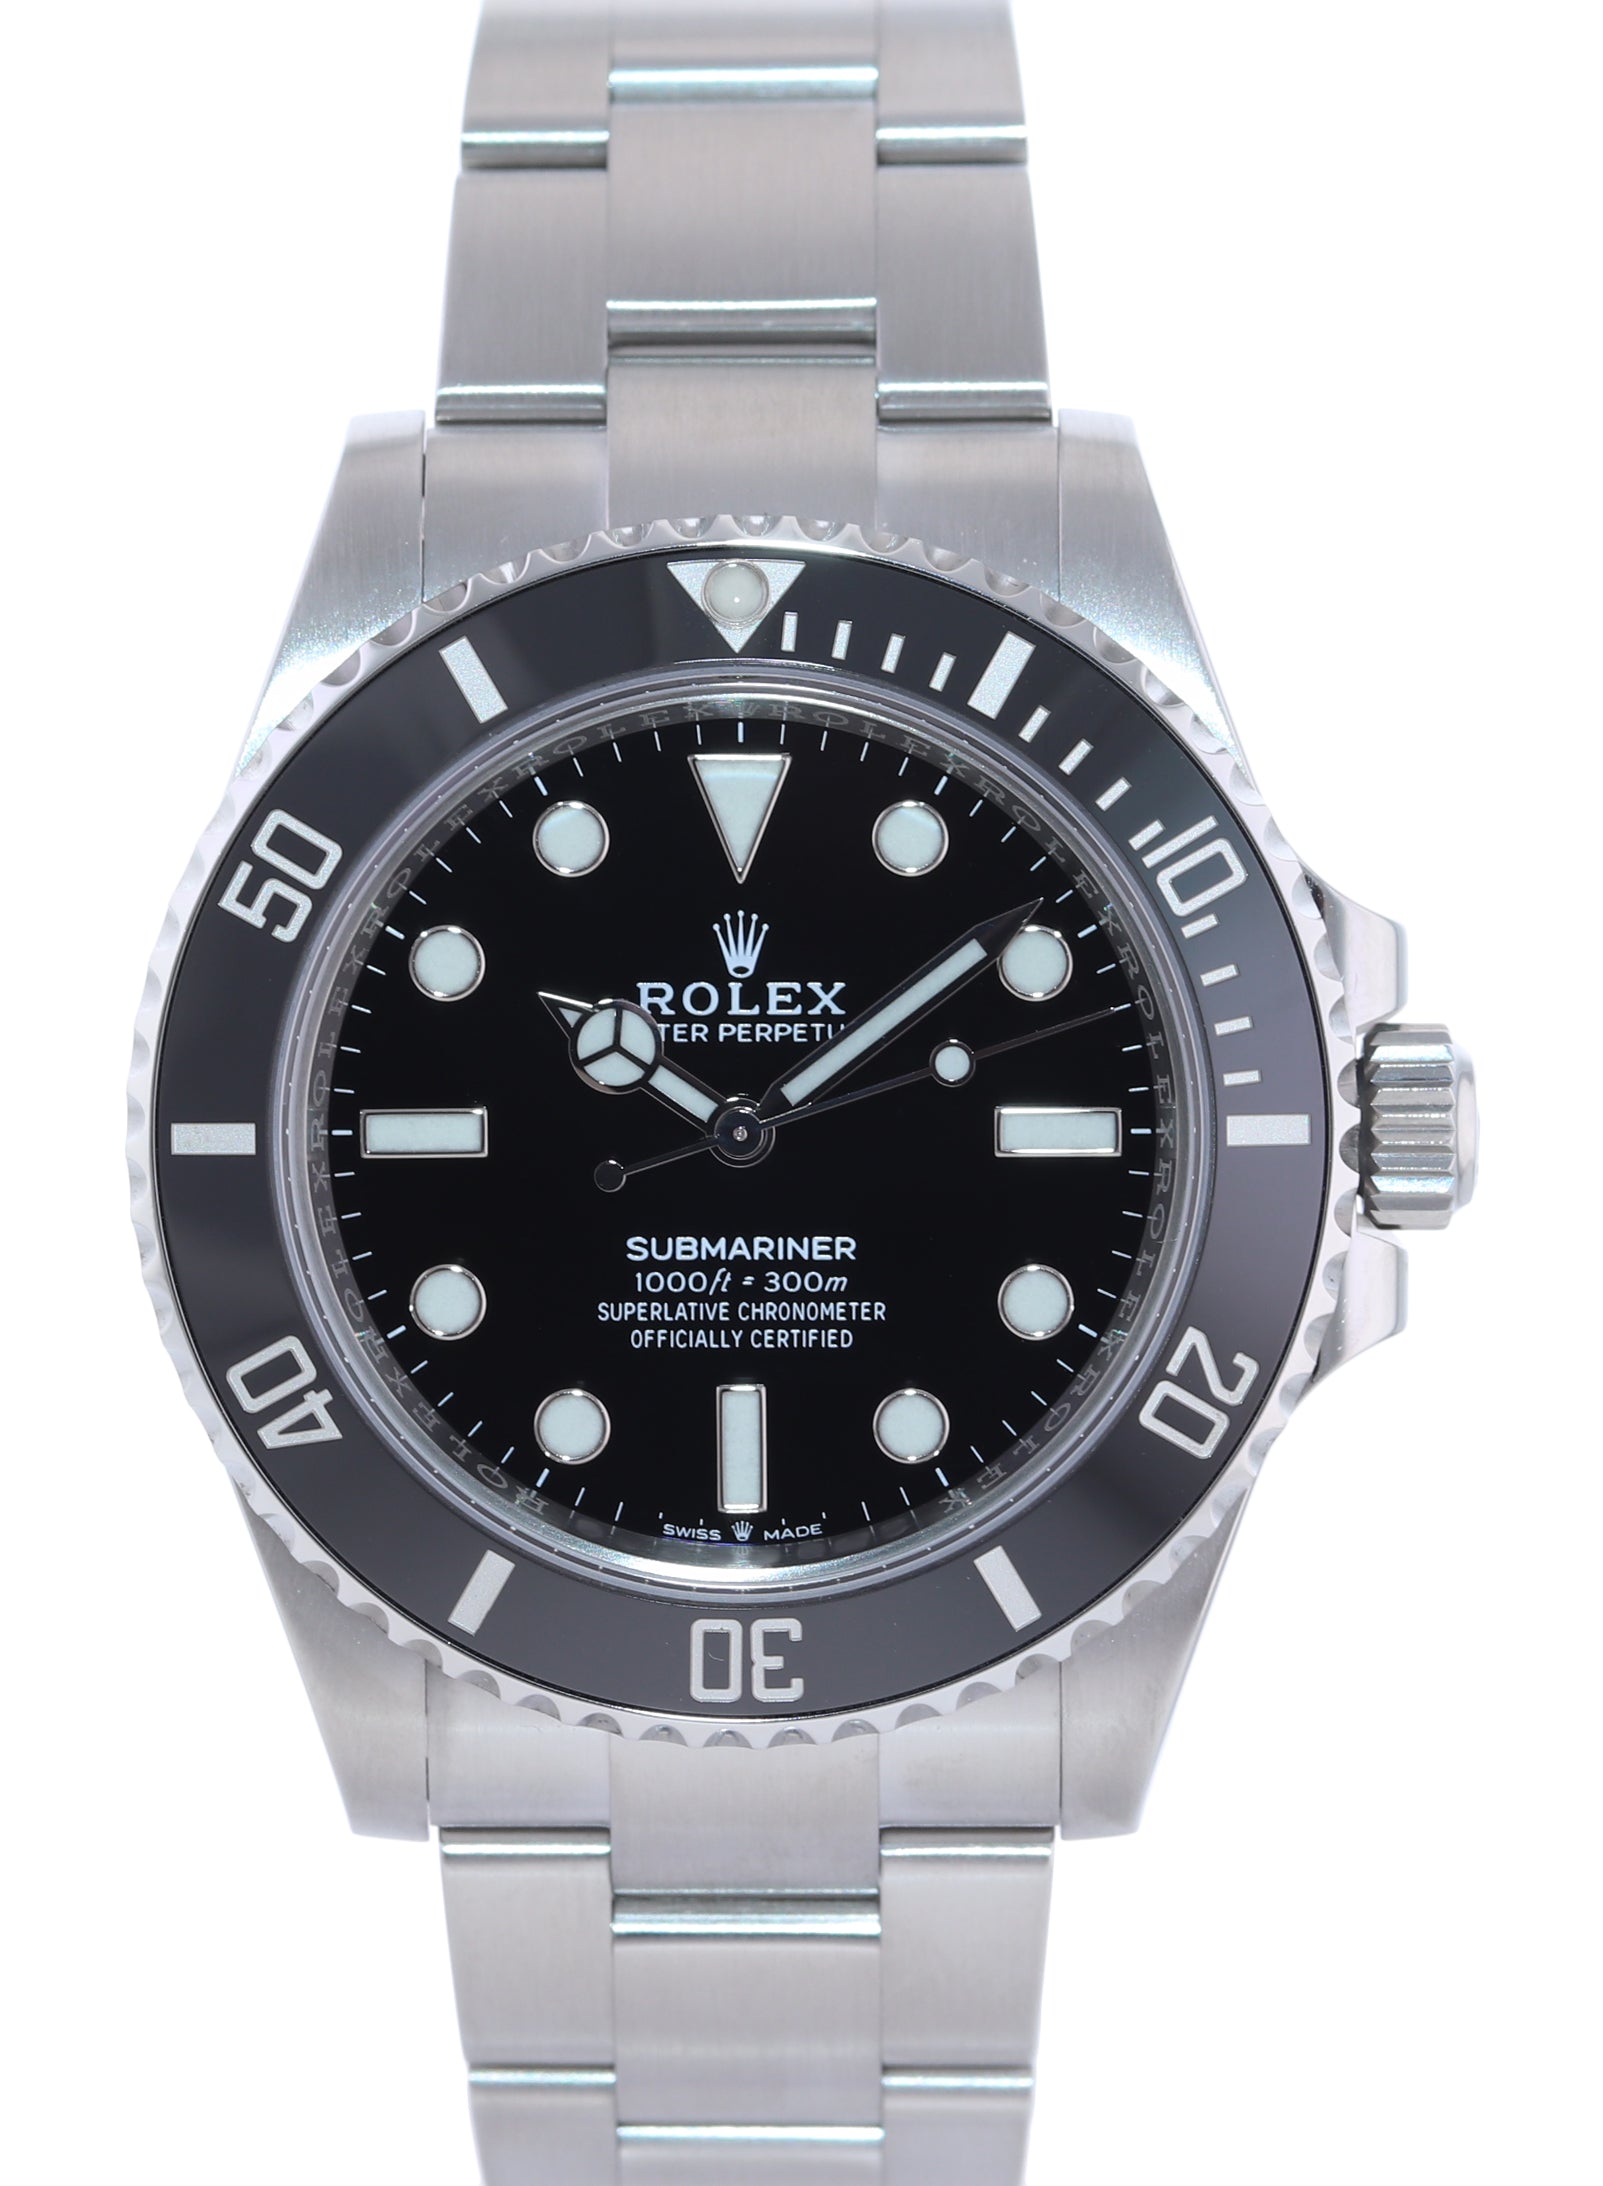 PAPERS Rolex Submariner 41mm Black Ceramic 124060LN No Date Watch Box